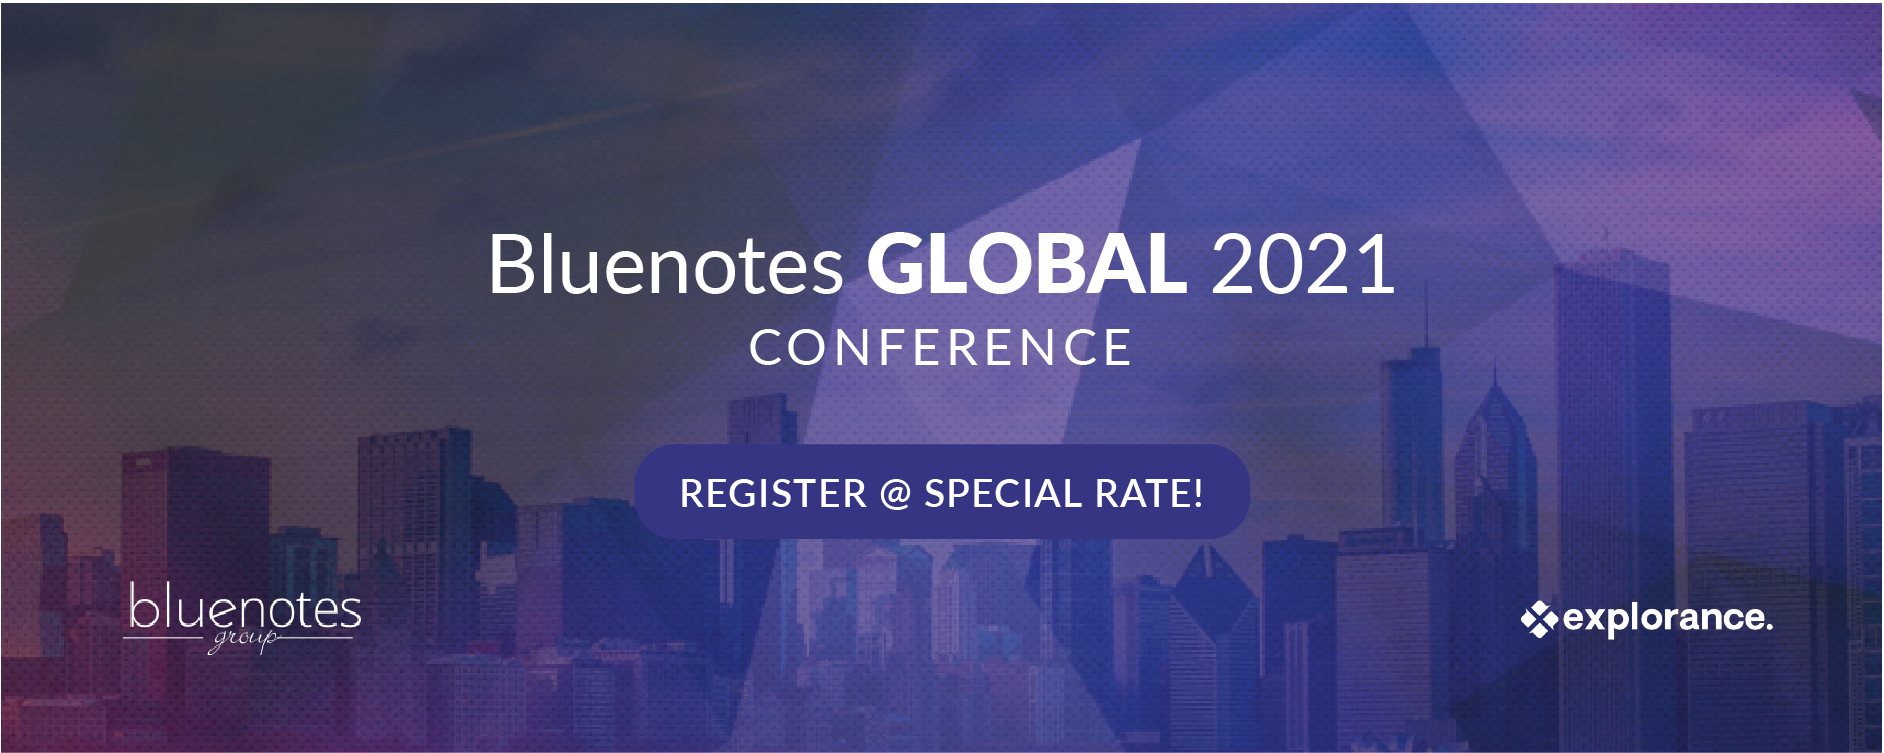 Bluenotes GLOBAL 2021 Conference